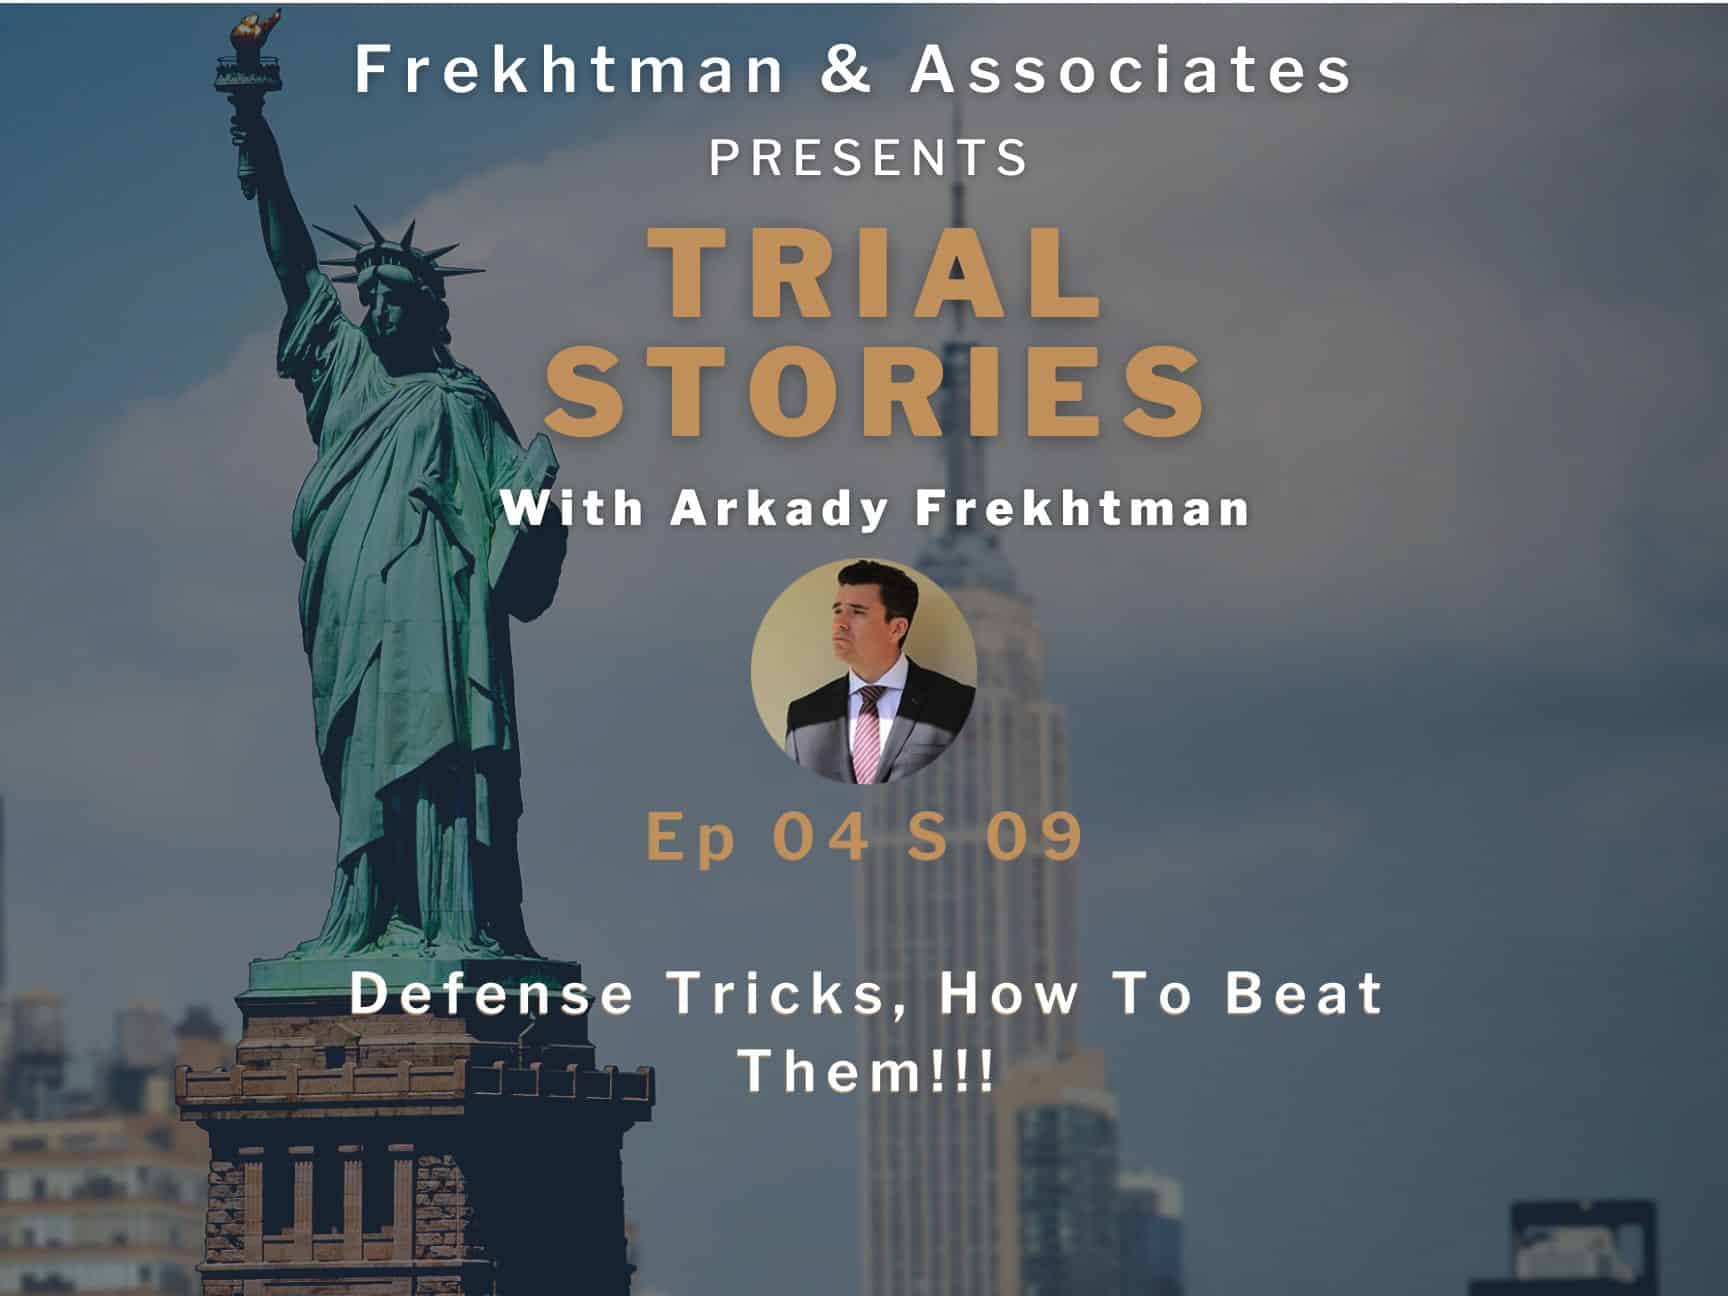 trial-stories-how-to-beat-defense-trick-arkady-frekhtman